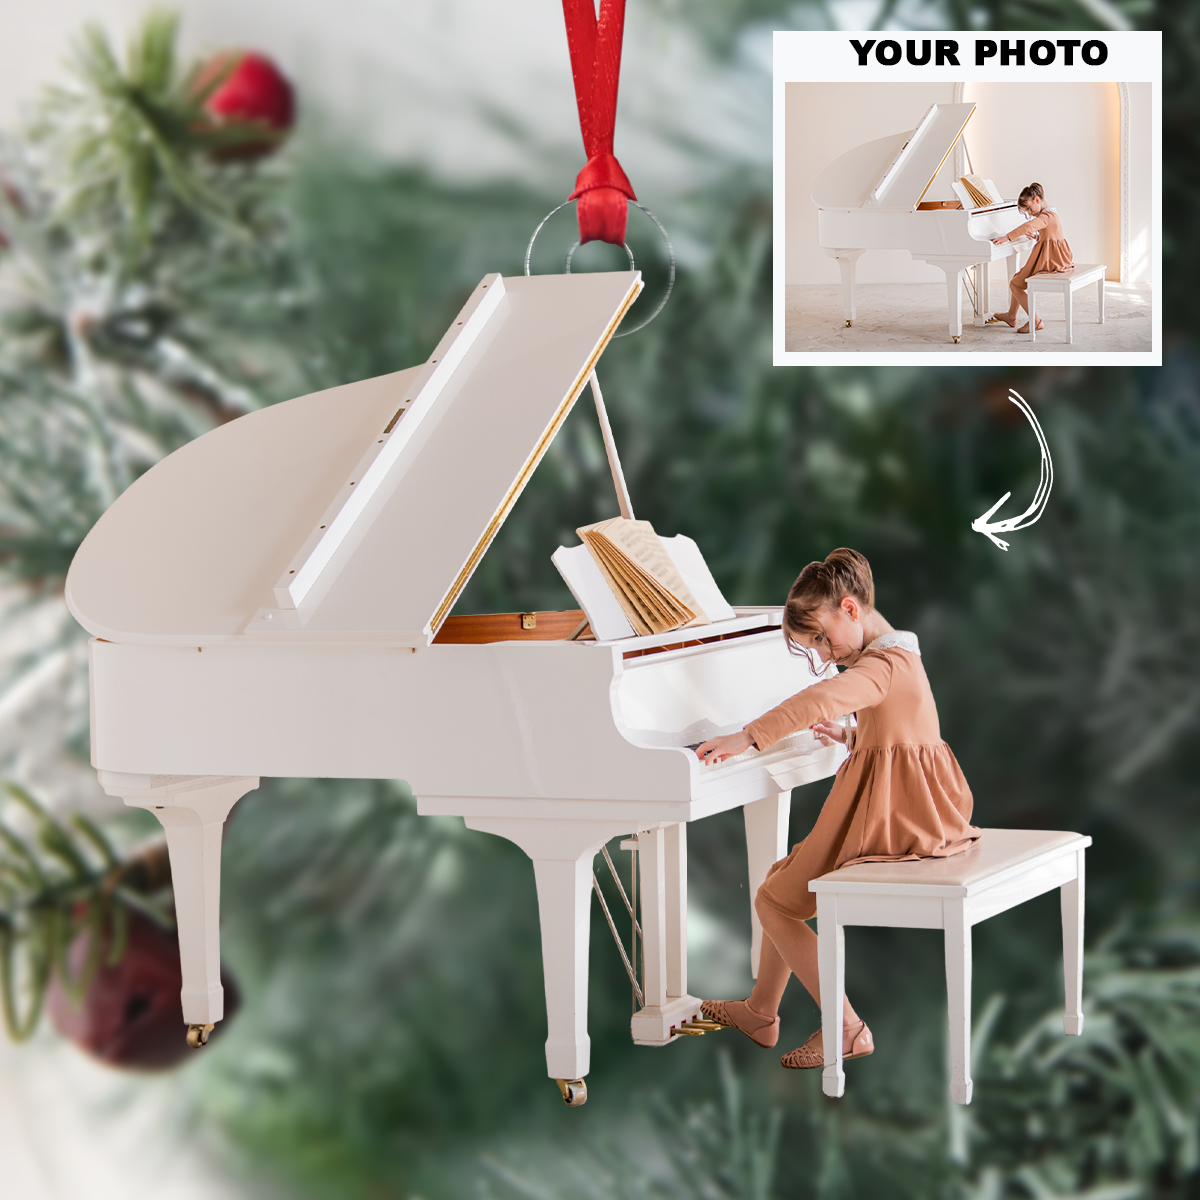 The Pianist - Personalized Photo Mica Ornament - Customized Your Photo Ornament - Christmas Gift For Music Lovers, Friends